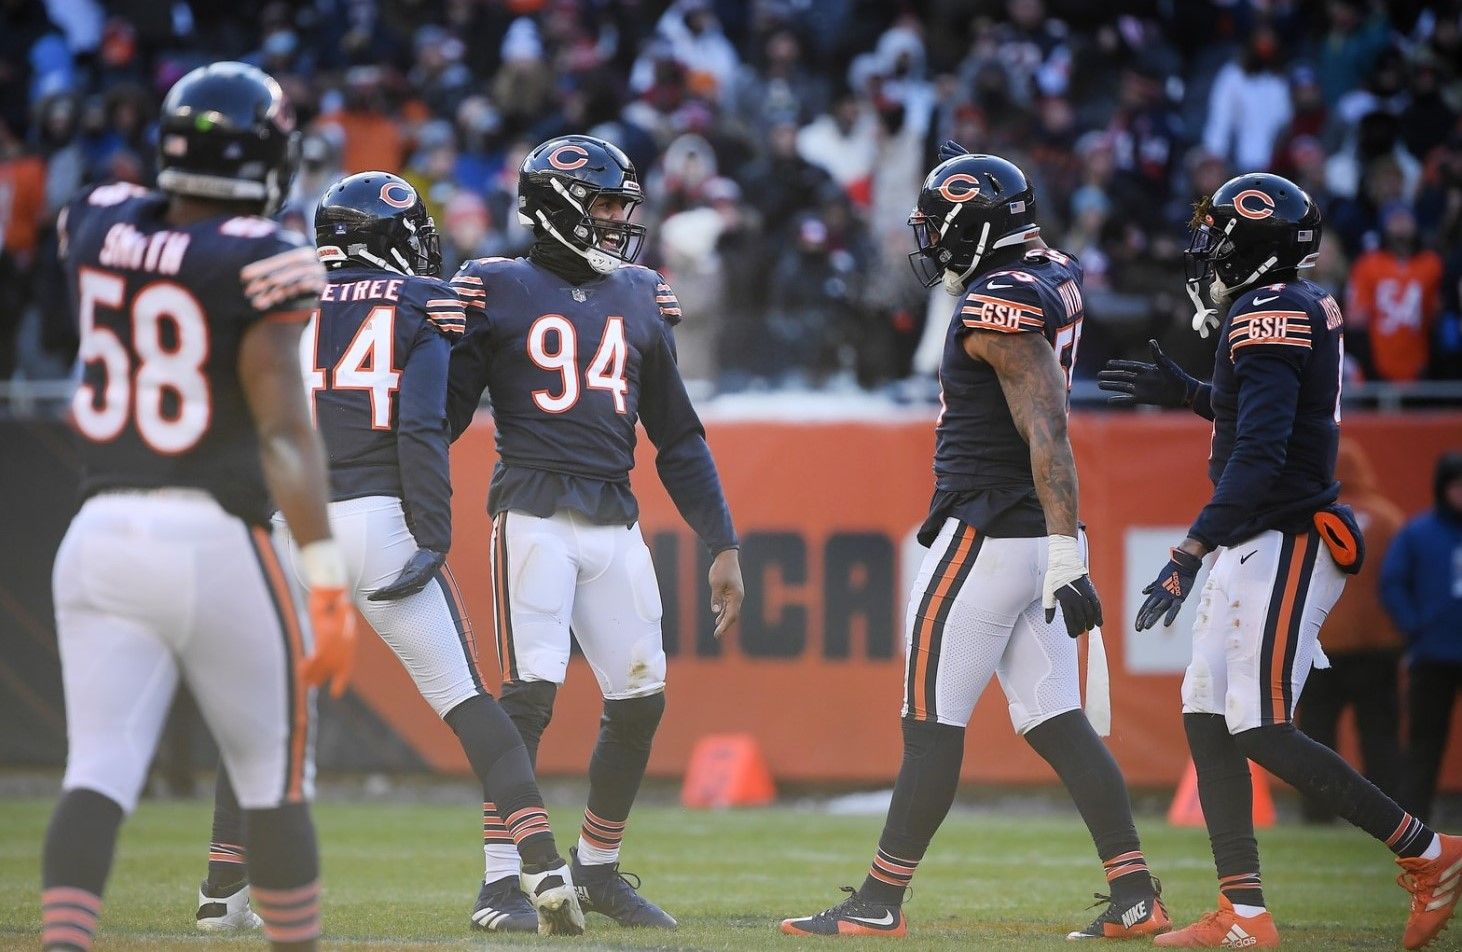 Quinn sets Bears season sacks record in 29-3 rout of Giants